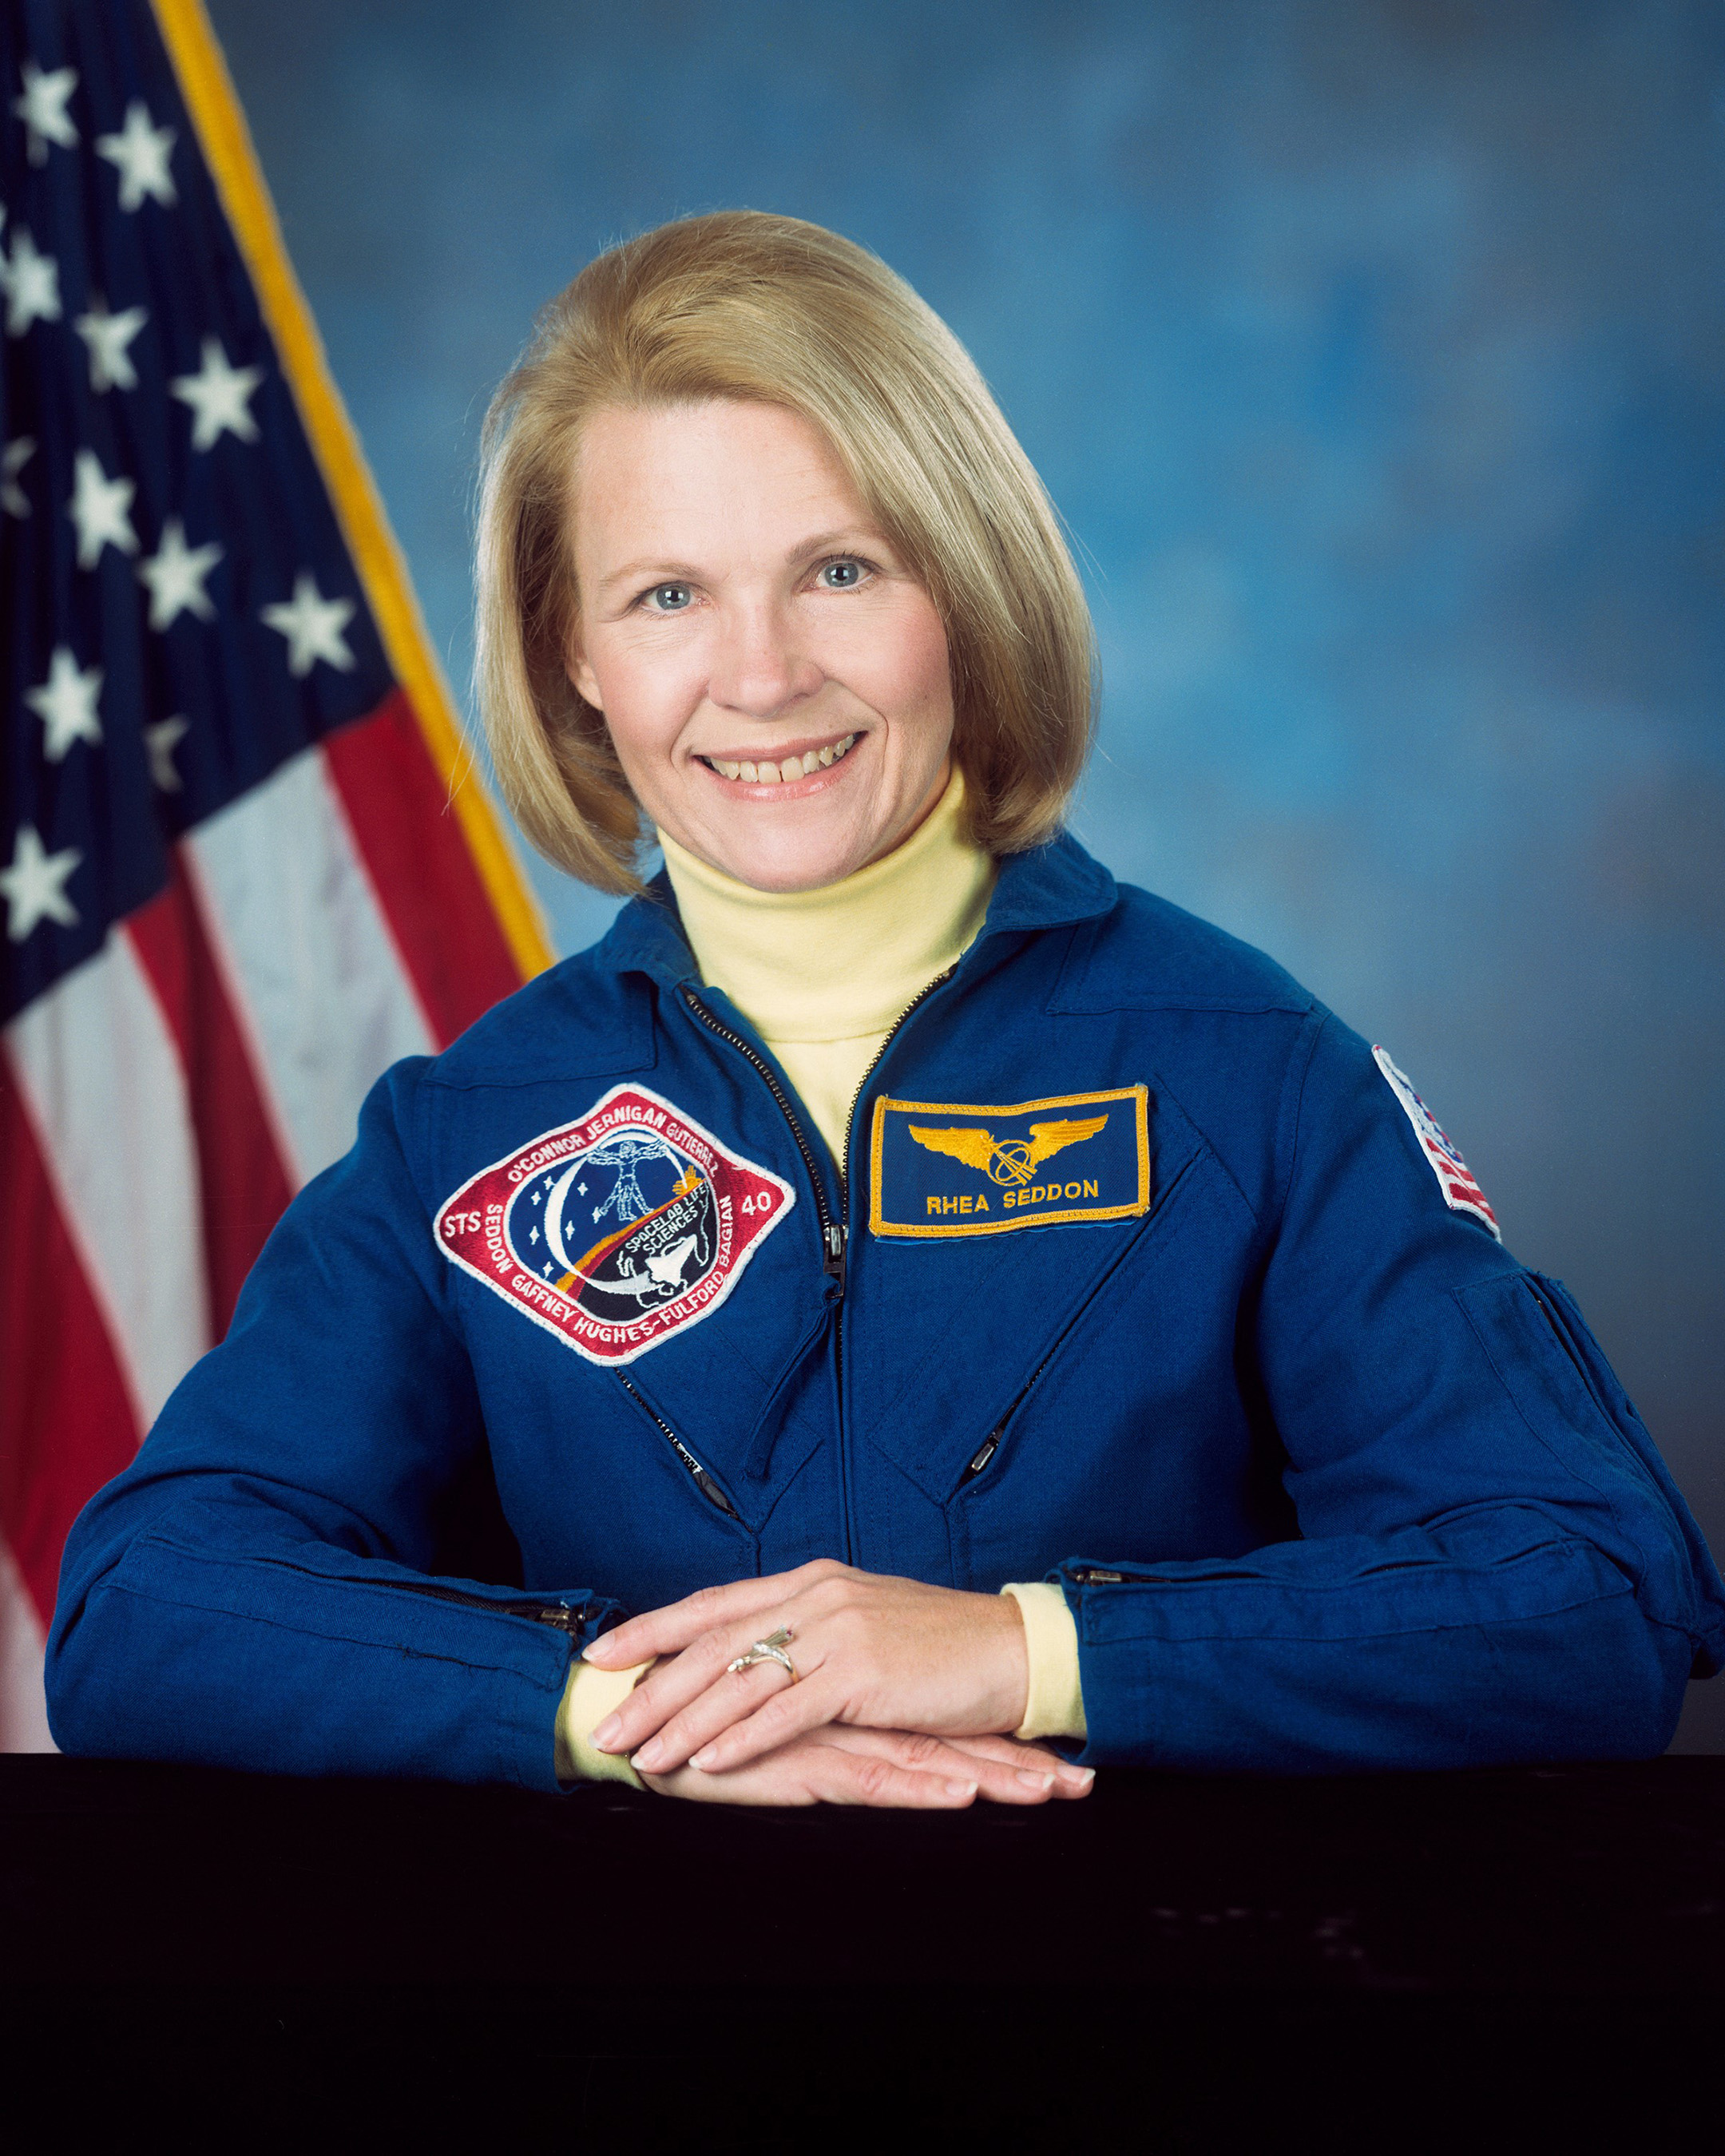 Dr. Rhea Seddon, a three-time space shuttle astronaut, will be inducted into the U.S. Astronaut Hall of Fame on May 30 at Kennedy Space Center Visitor Complex.